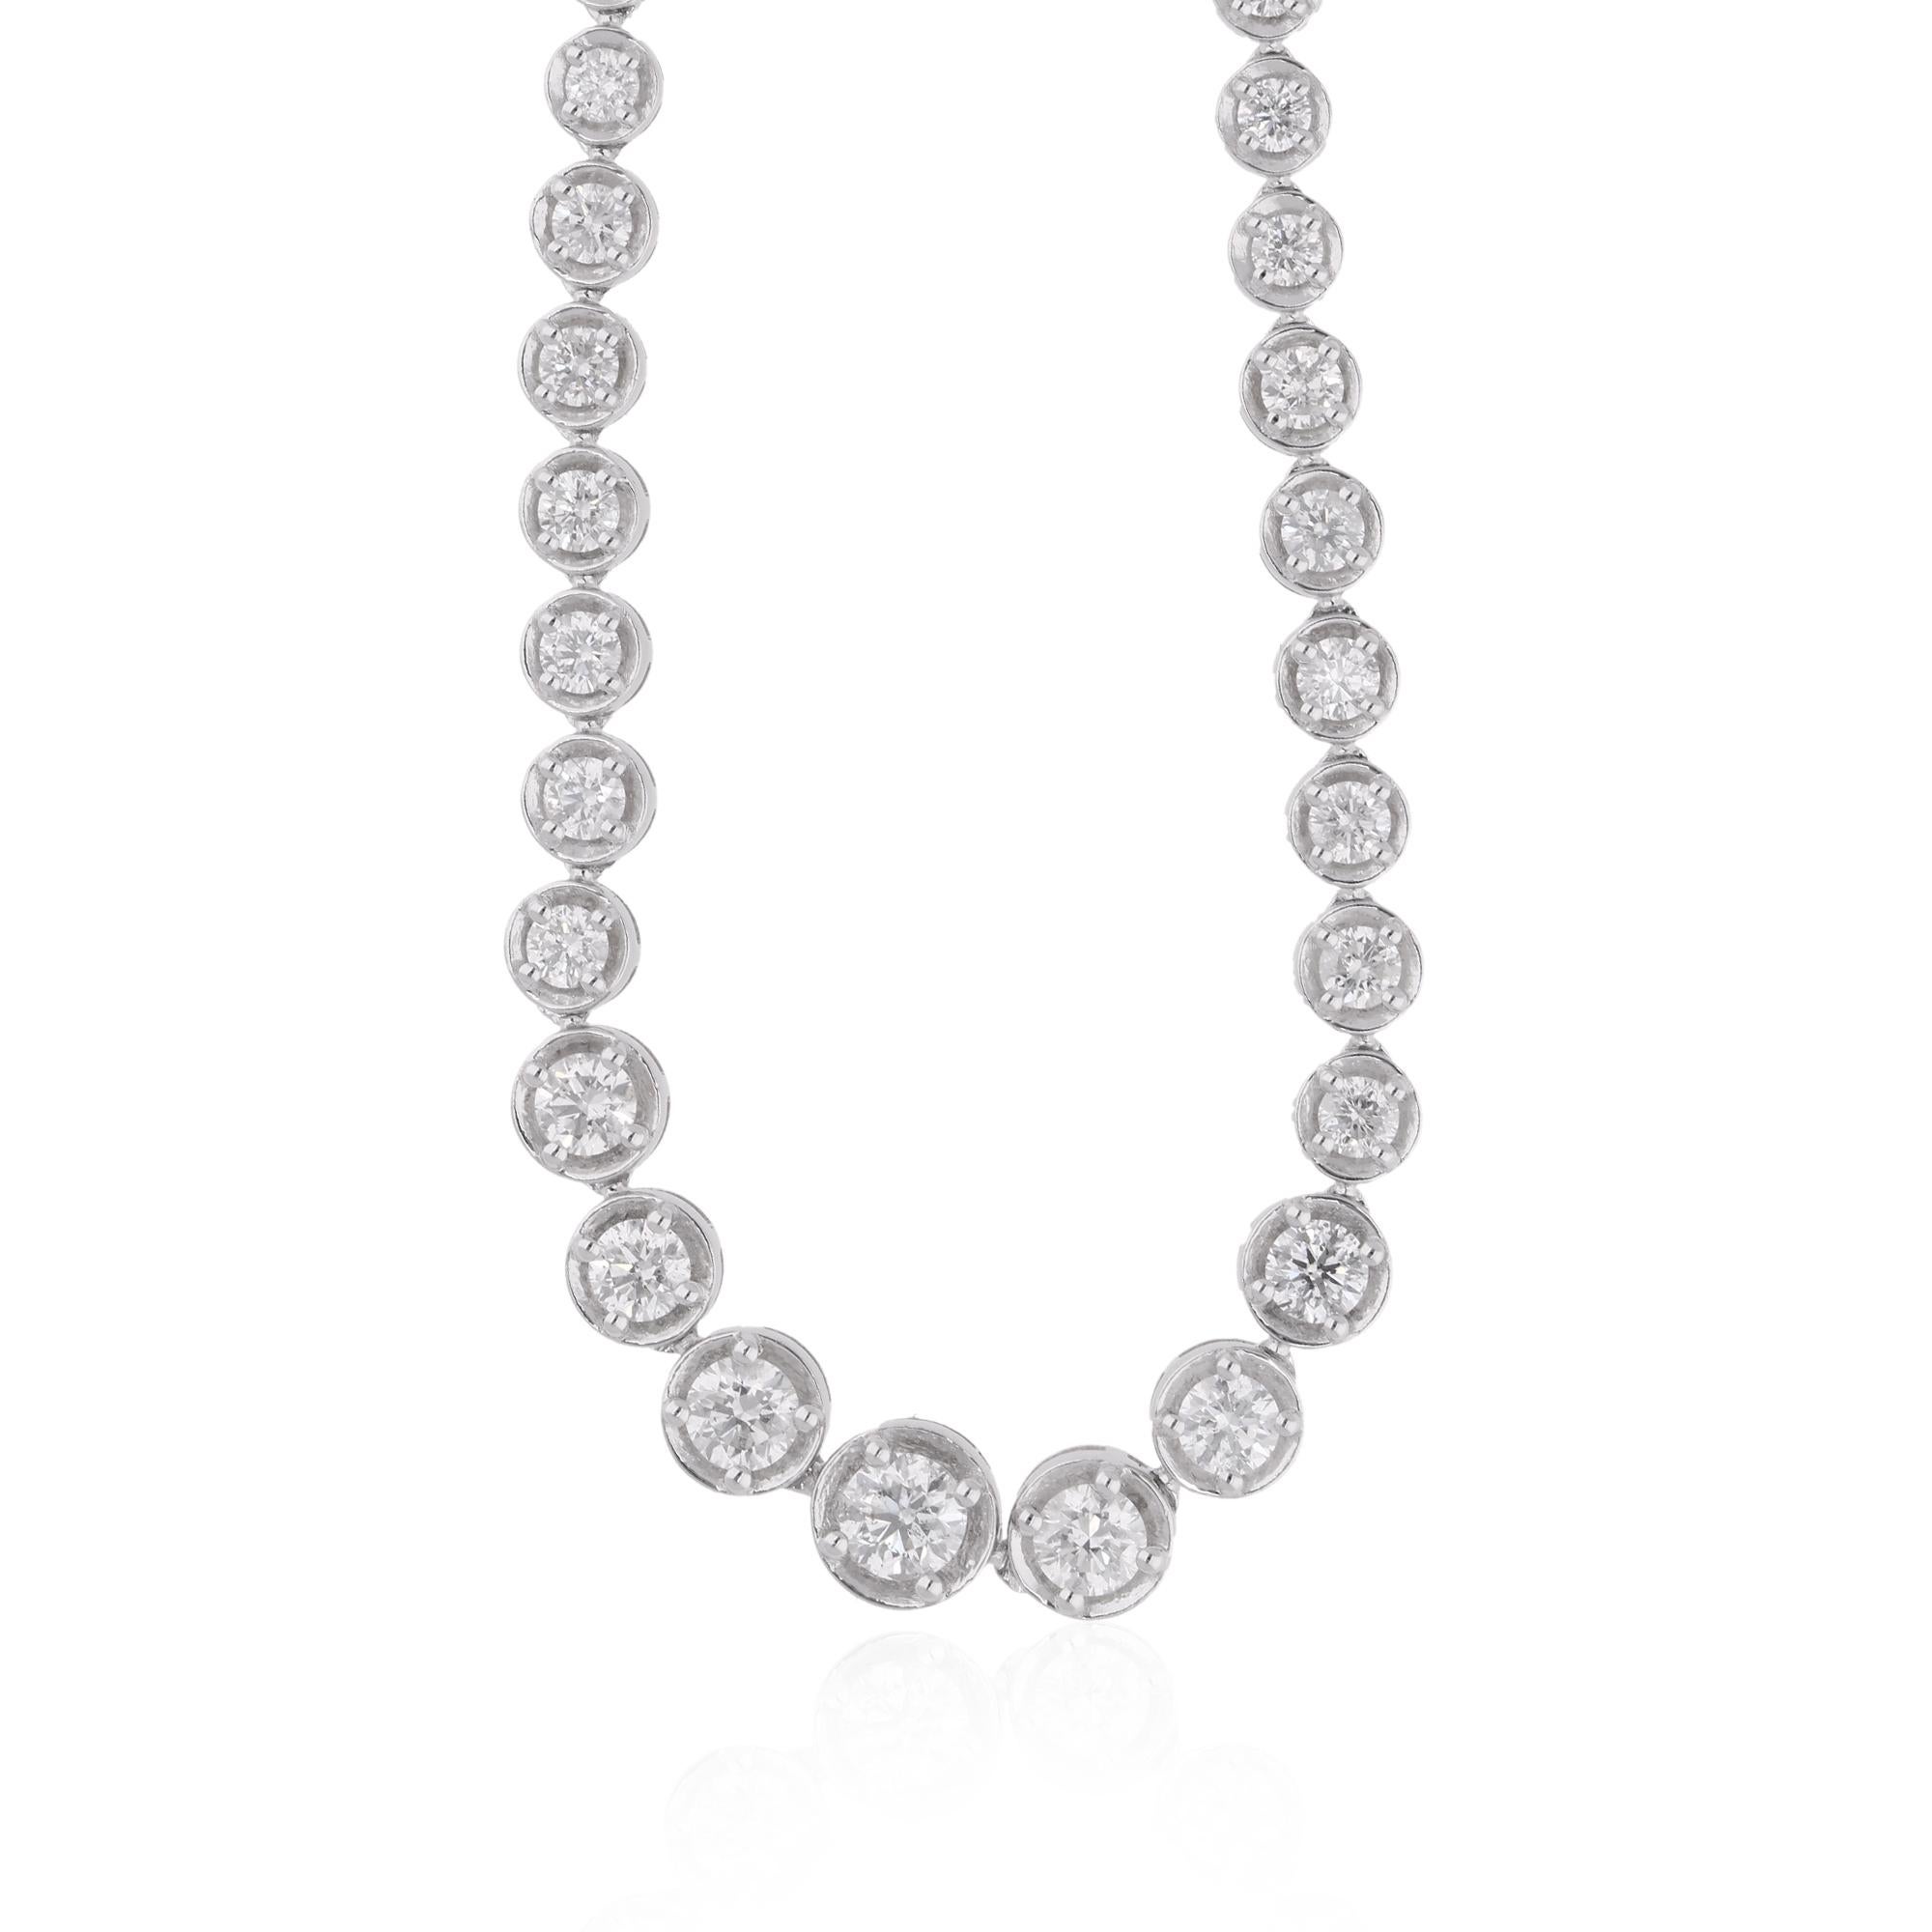 Item Code :- SECH-71038
Gross Wt. :- 22.73 gm
18k White Gold Wt. :- 21.81 gm
Natural Diamond Wt. :- 4.61 Ct.  ( AVERAGE DIAMOND CLARITY SI1-SI2 & COLOR H-I )
Necklace Length :- 16 Inches Long

✦ Sizing
.....................
We can adjust most items